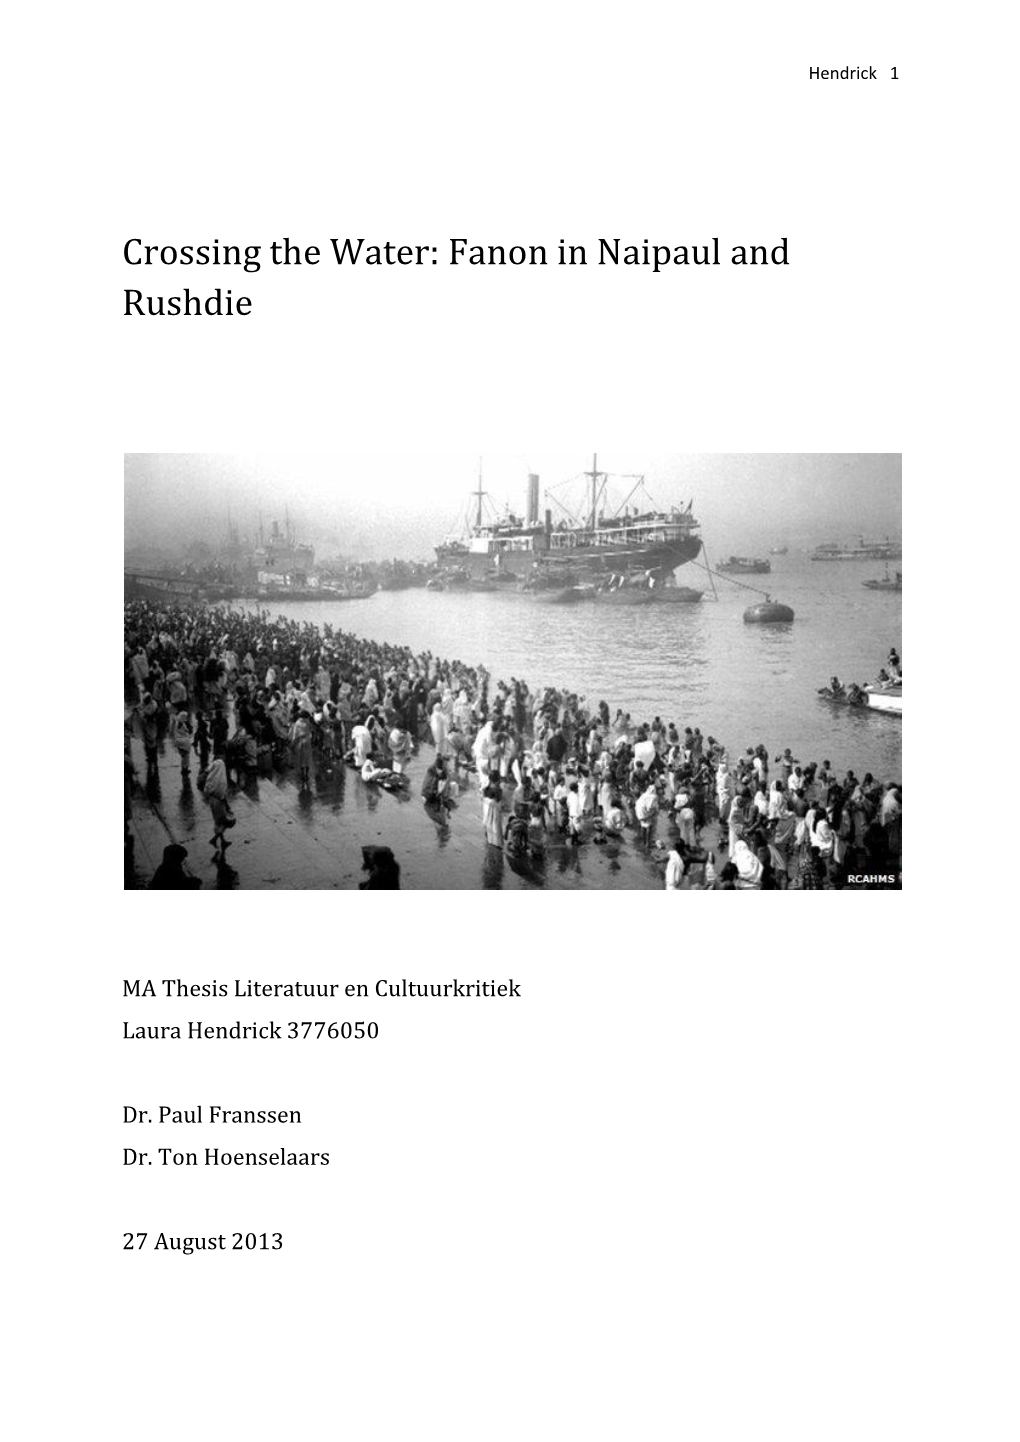 Crossing the Water: Fanon in Naipaul and Rushdie